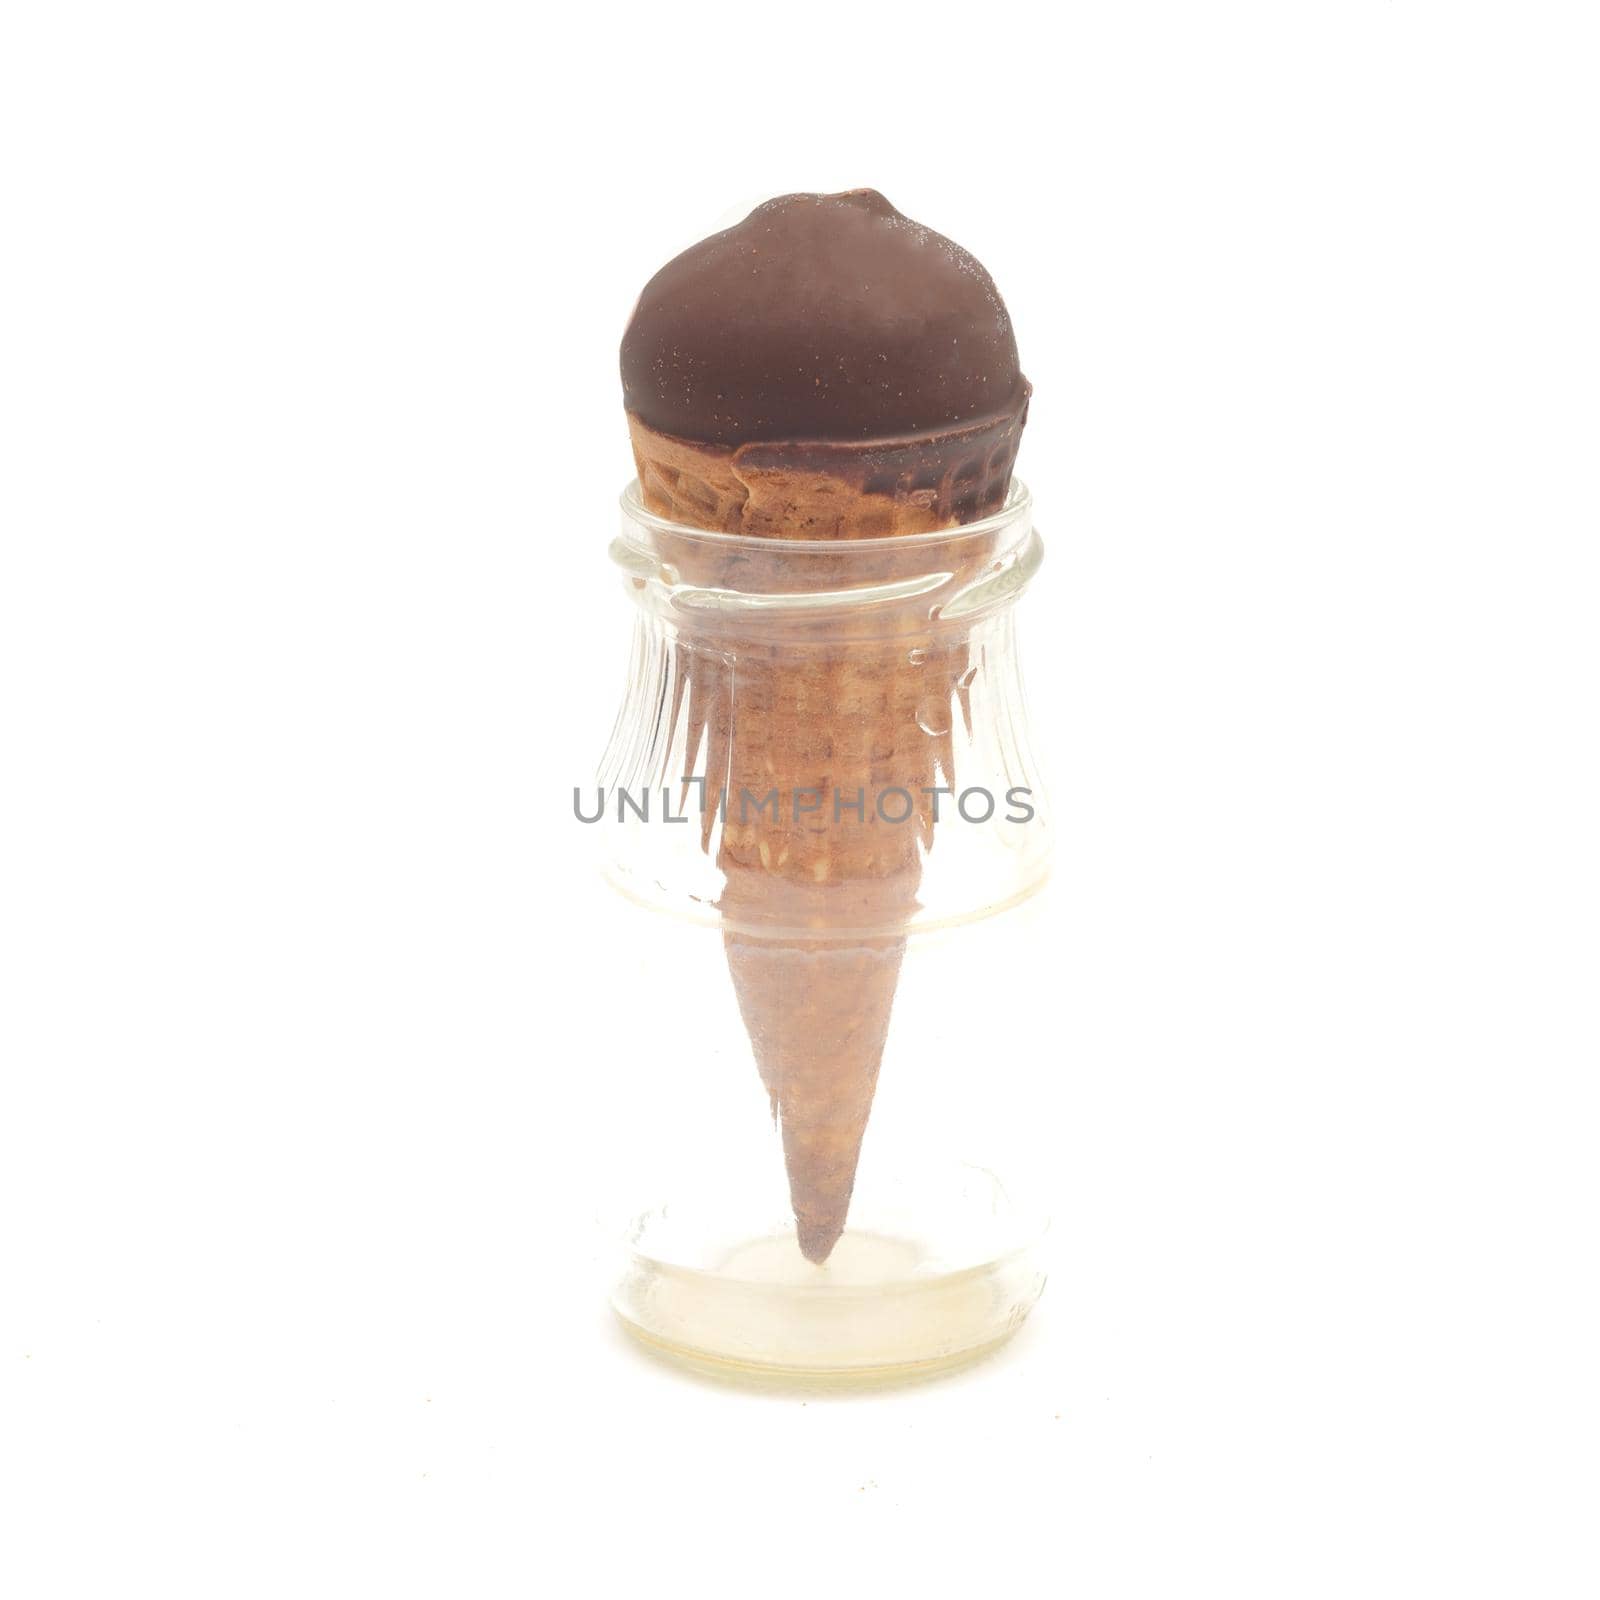 Chocolate ice-cream cone in small glass bottle isolated on white background.